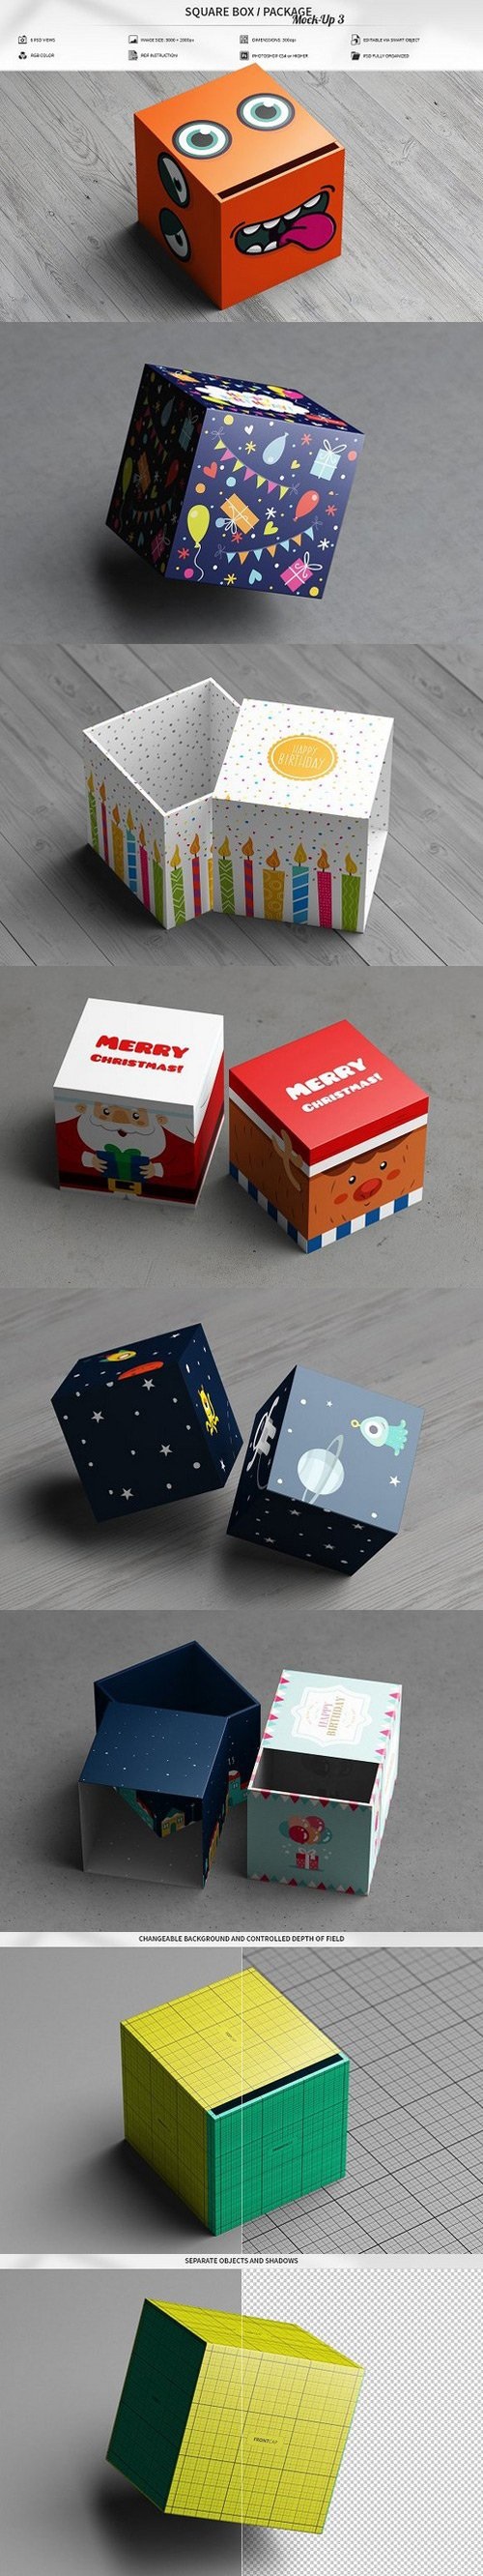 Square Box / Package Mock-Up 3 1655939